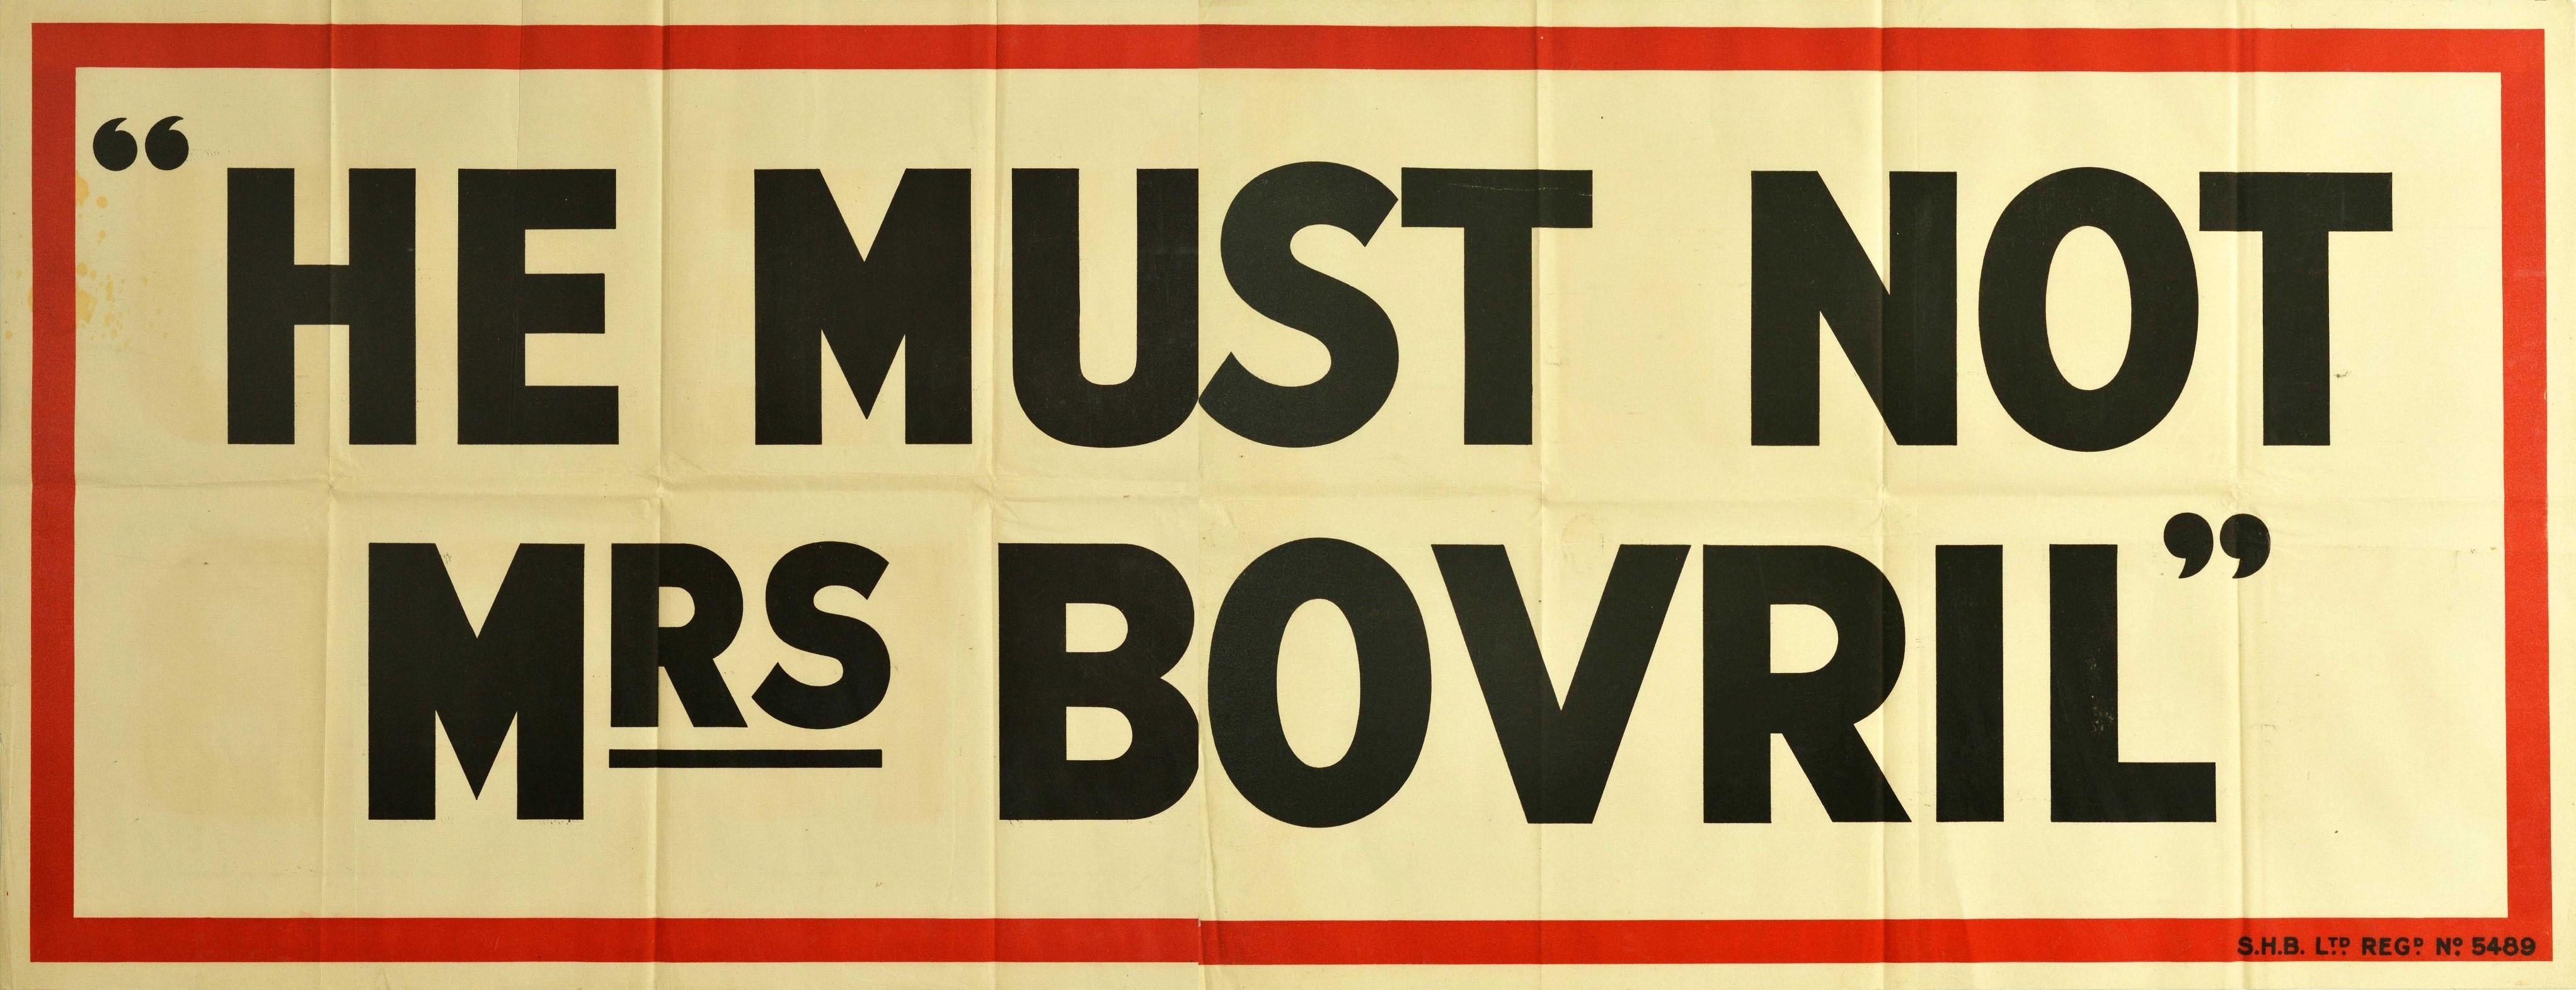 Original Vintage Poster He Must Not Mrs Bovril Word Play Pun Drink Food Campaign - Print by Unknown